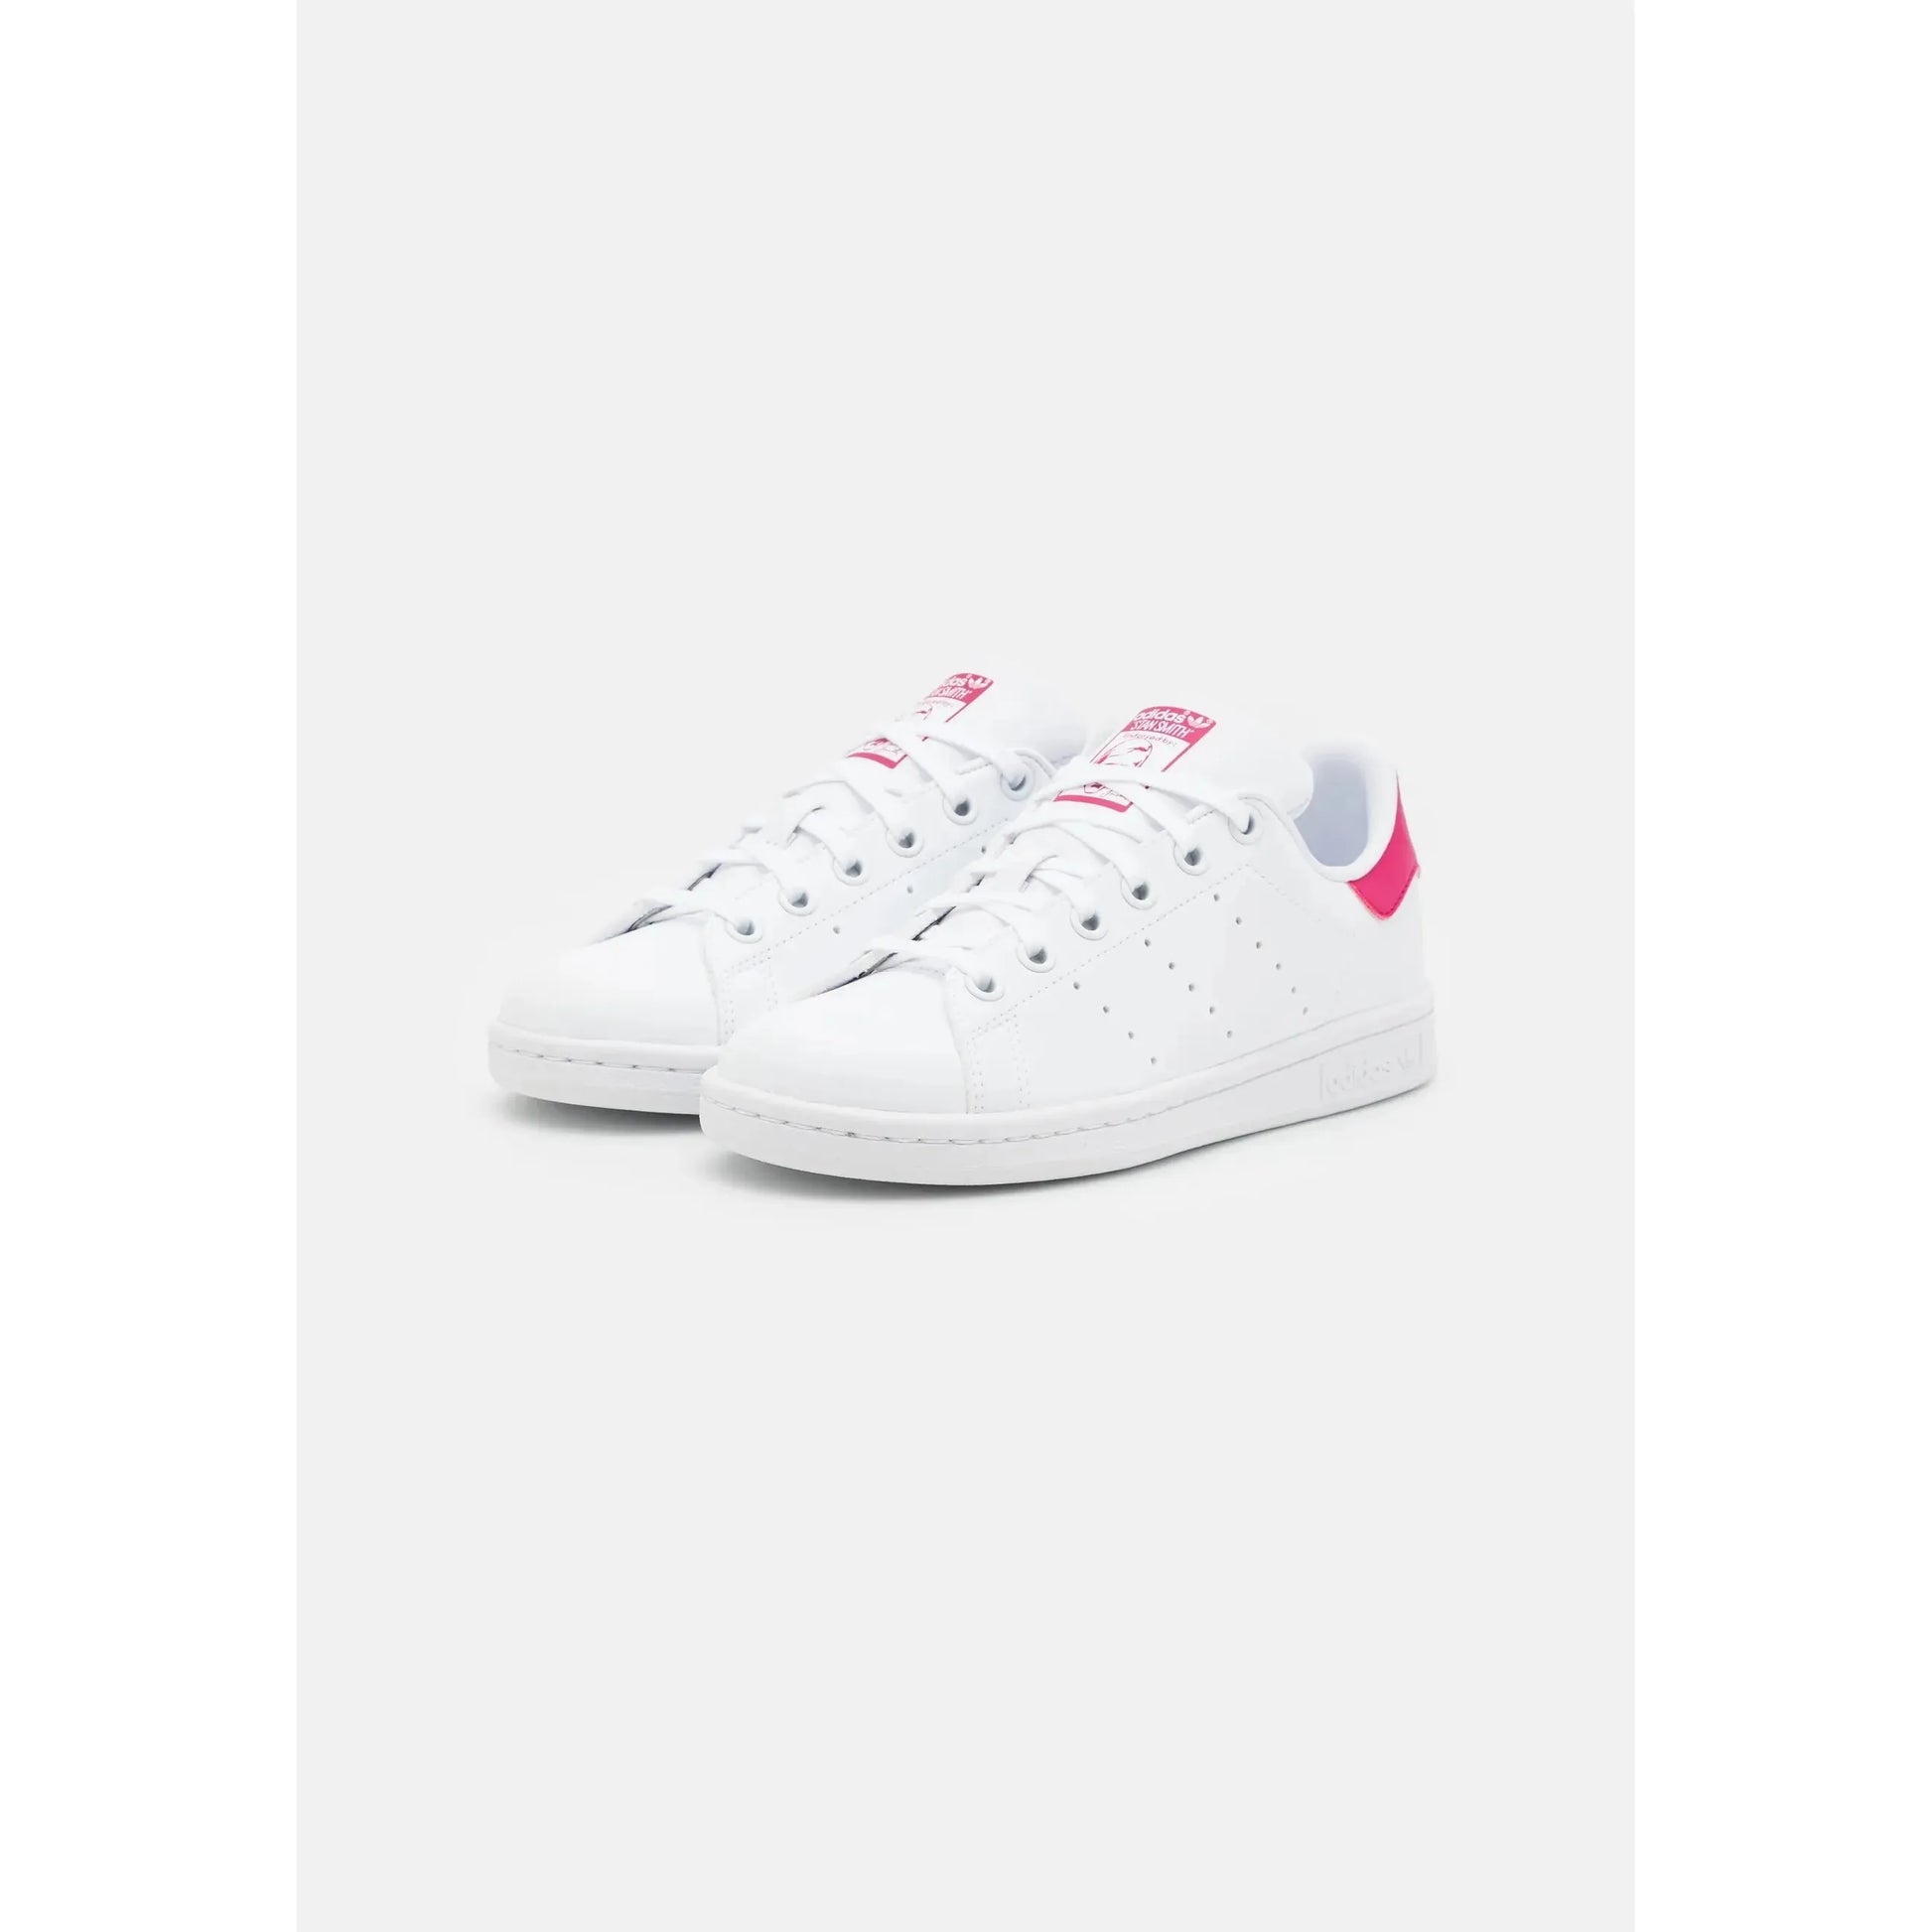 adidas allroundstar spikes shoes for women